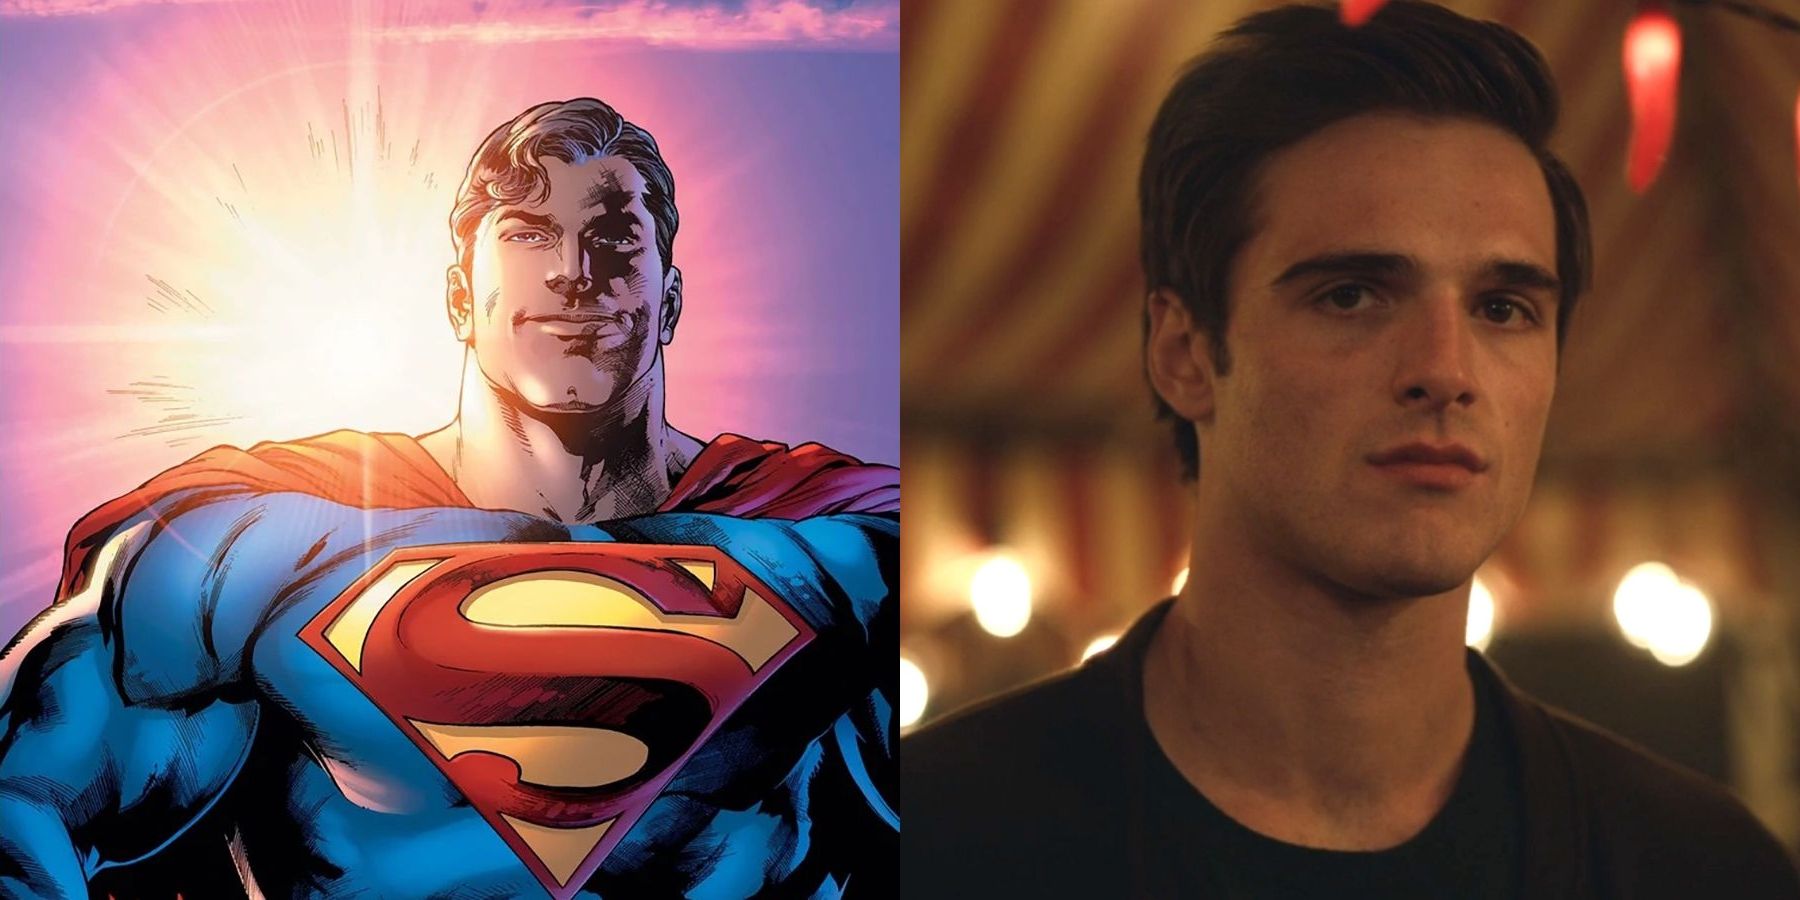 Who Will Actually Be the Next Superman? An Analysis